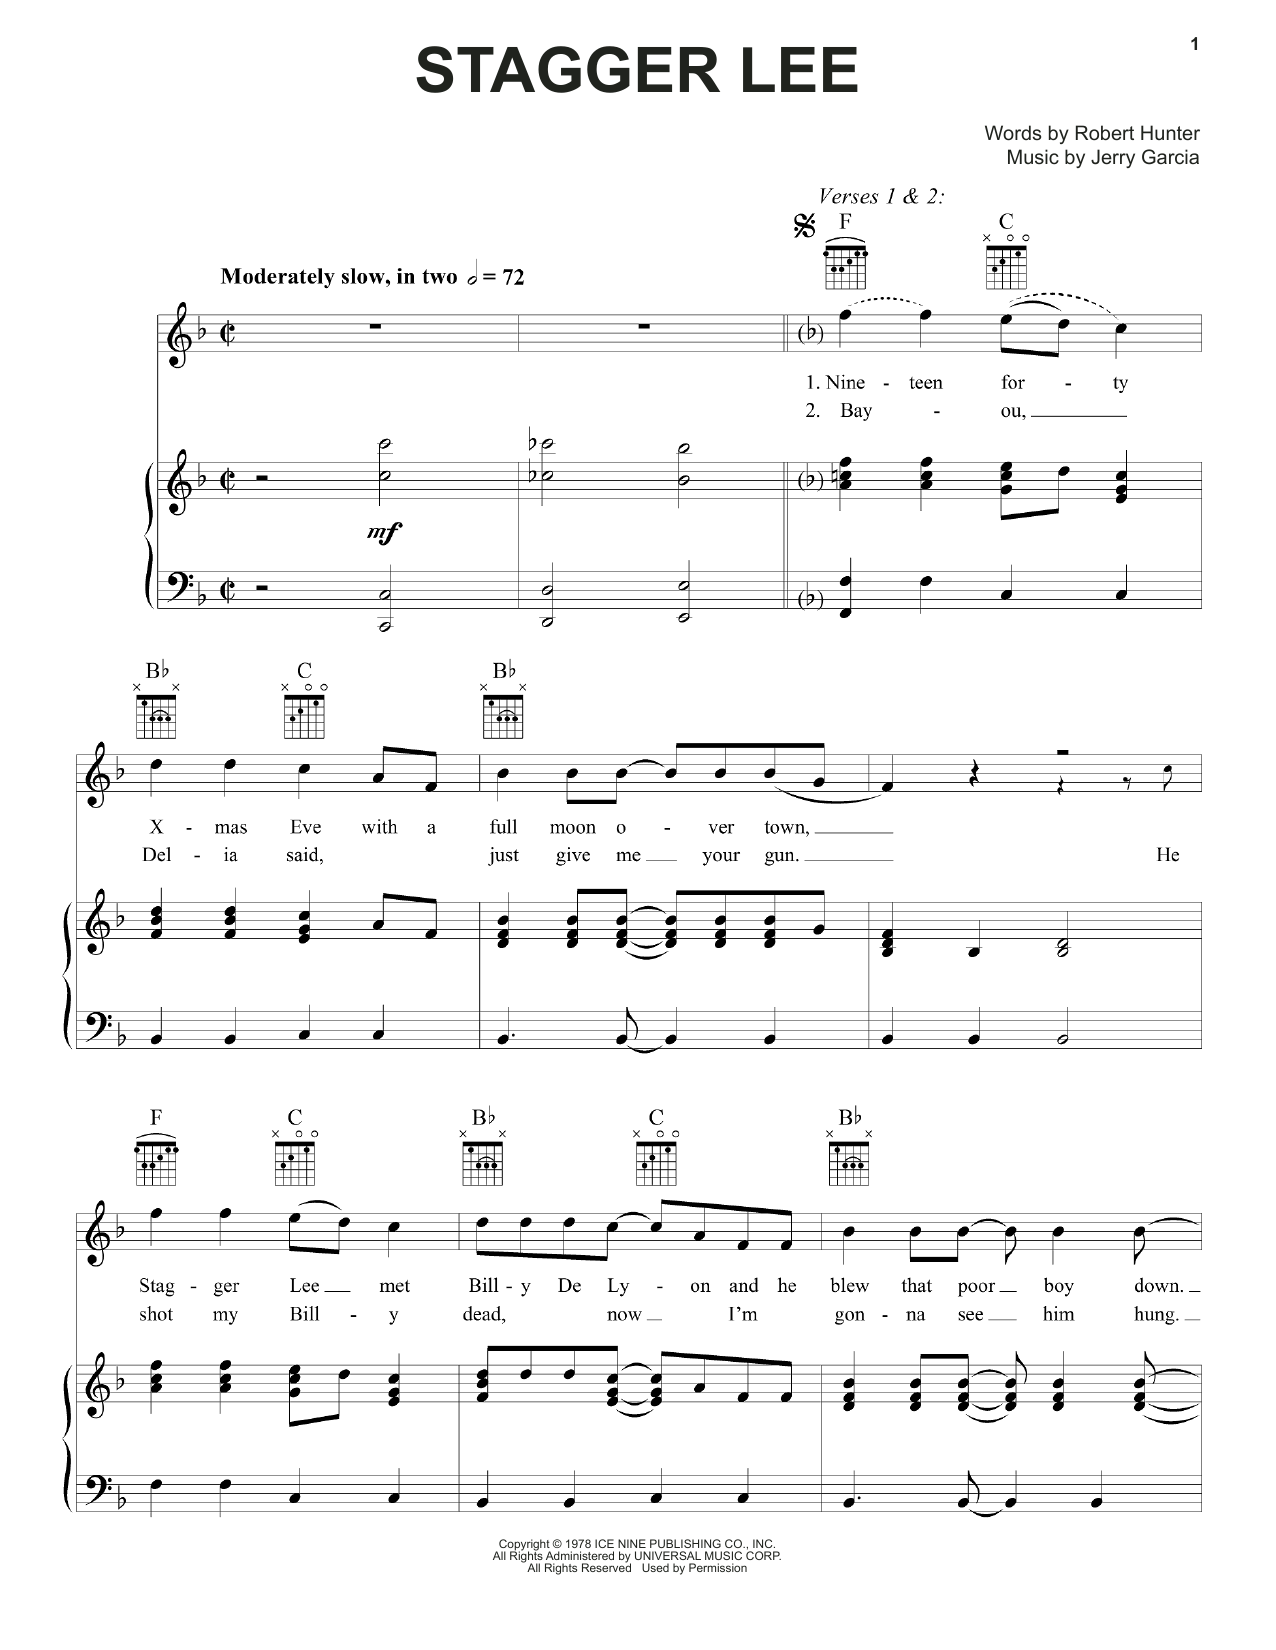 Stagger Lee sheet music